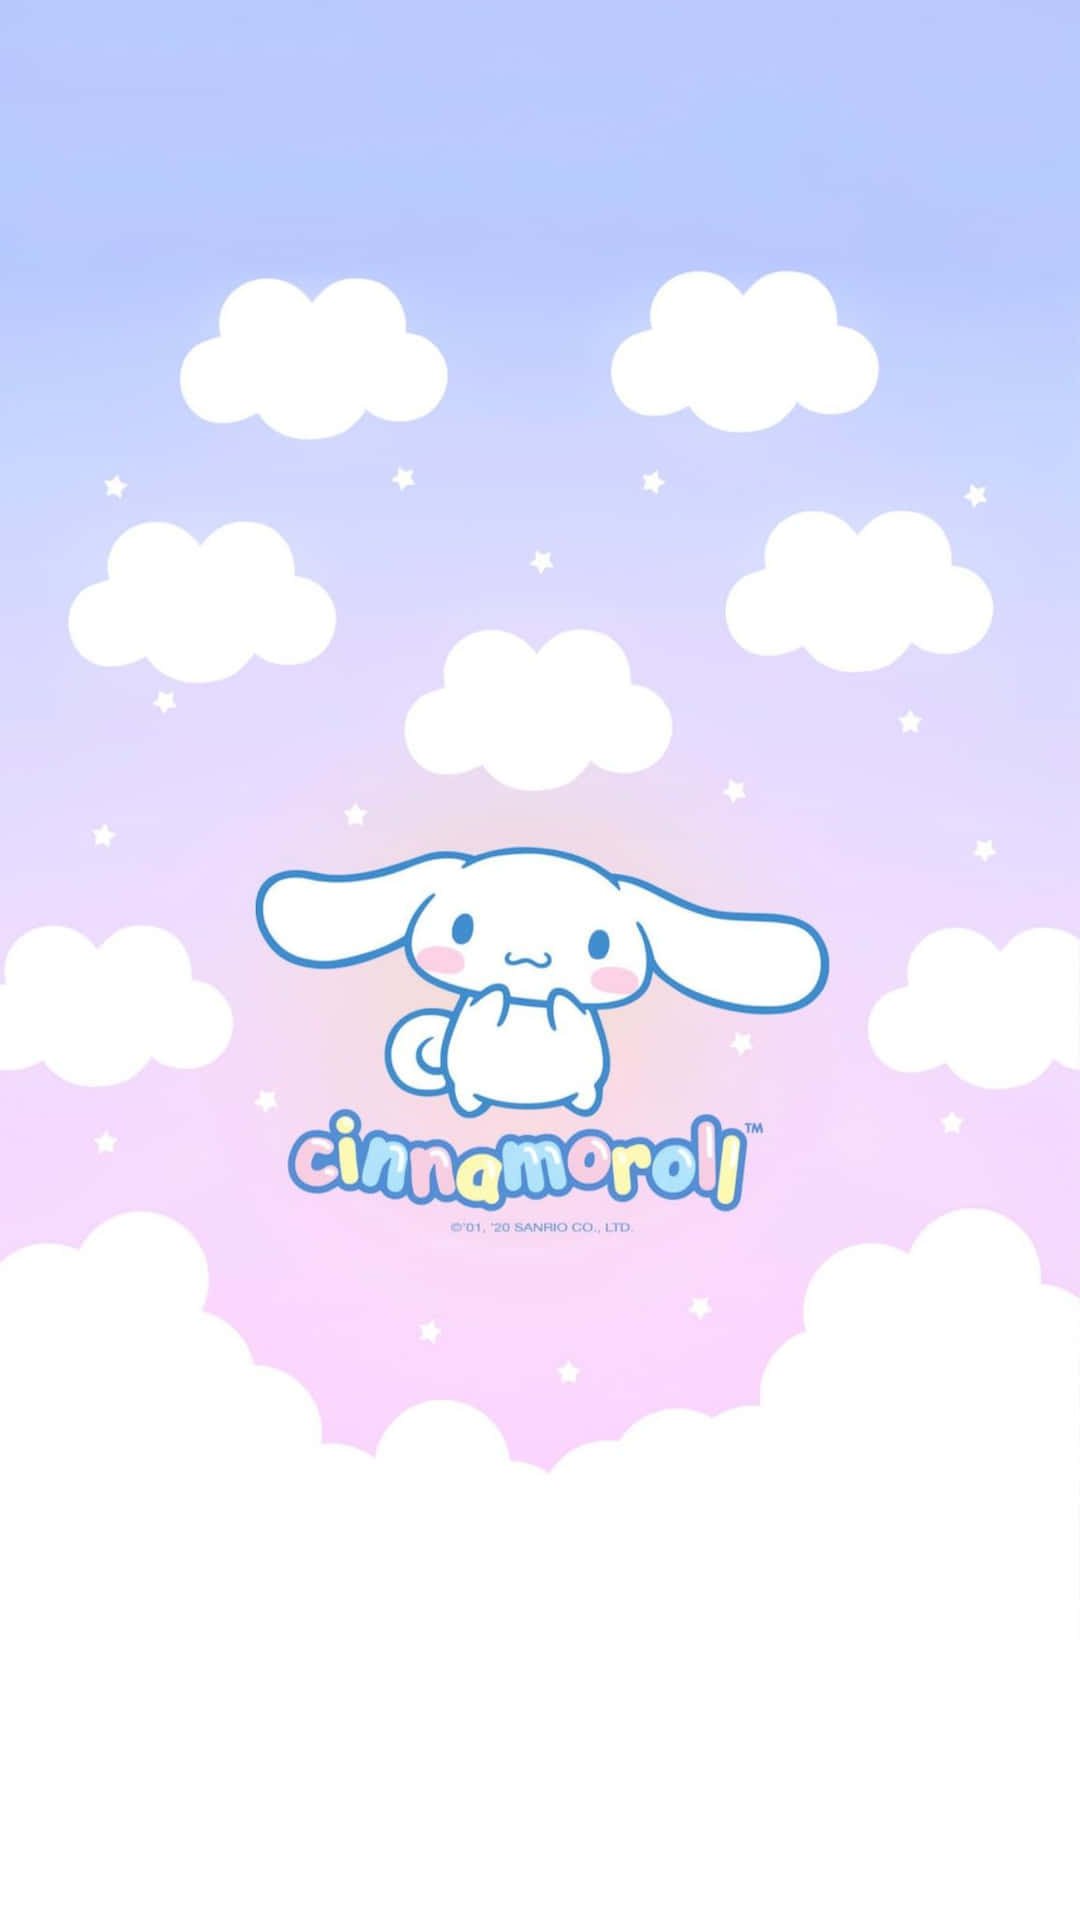 Enjoy a magical adventure with the cutest puppy around - Cinnamoroll! Wallpaper